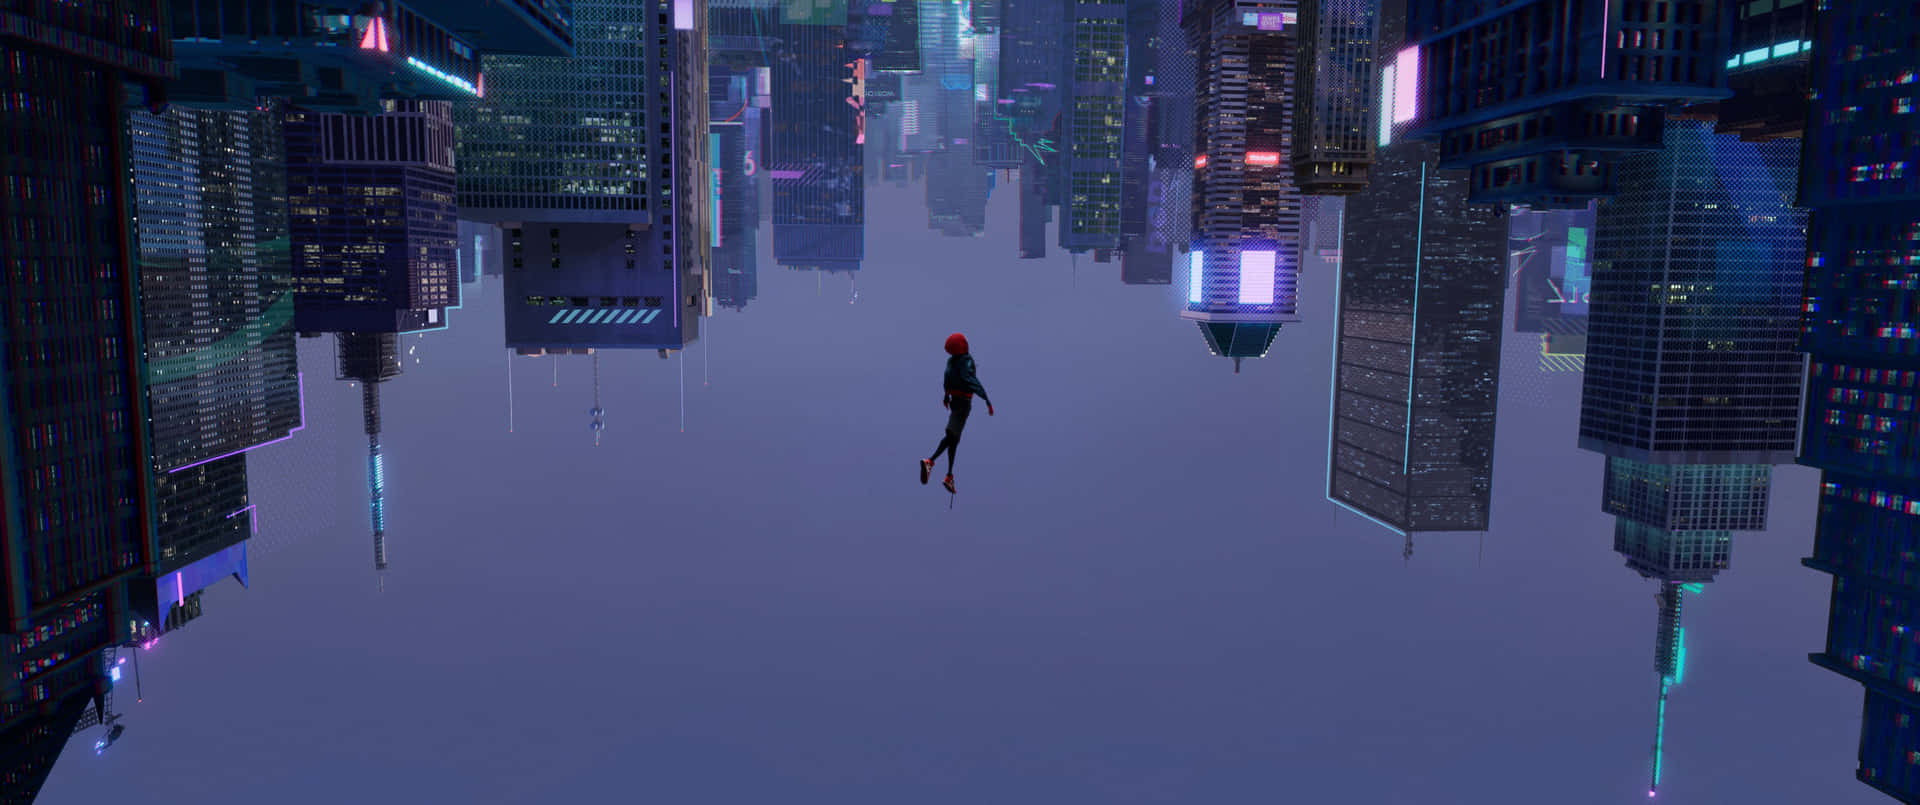 Stunning 4k Wallpaper Of Spider-man From Into The Spider-verse. Background